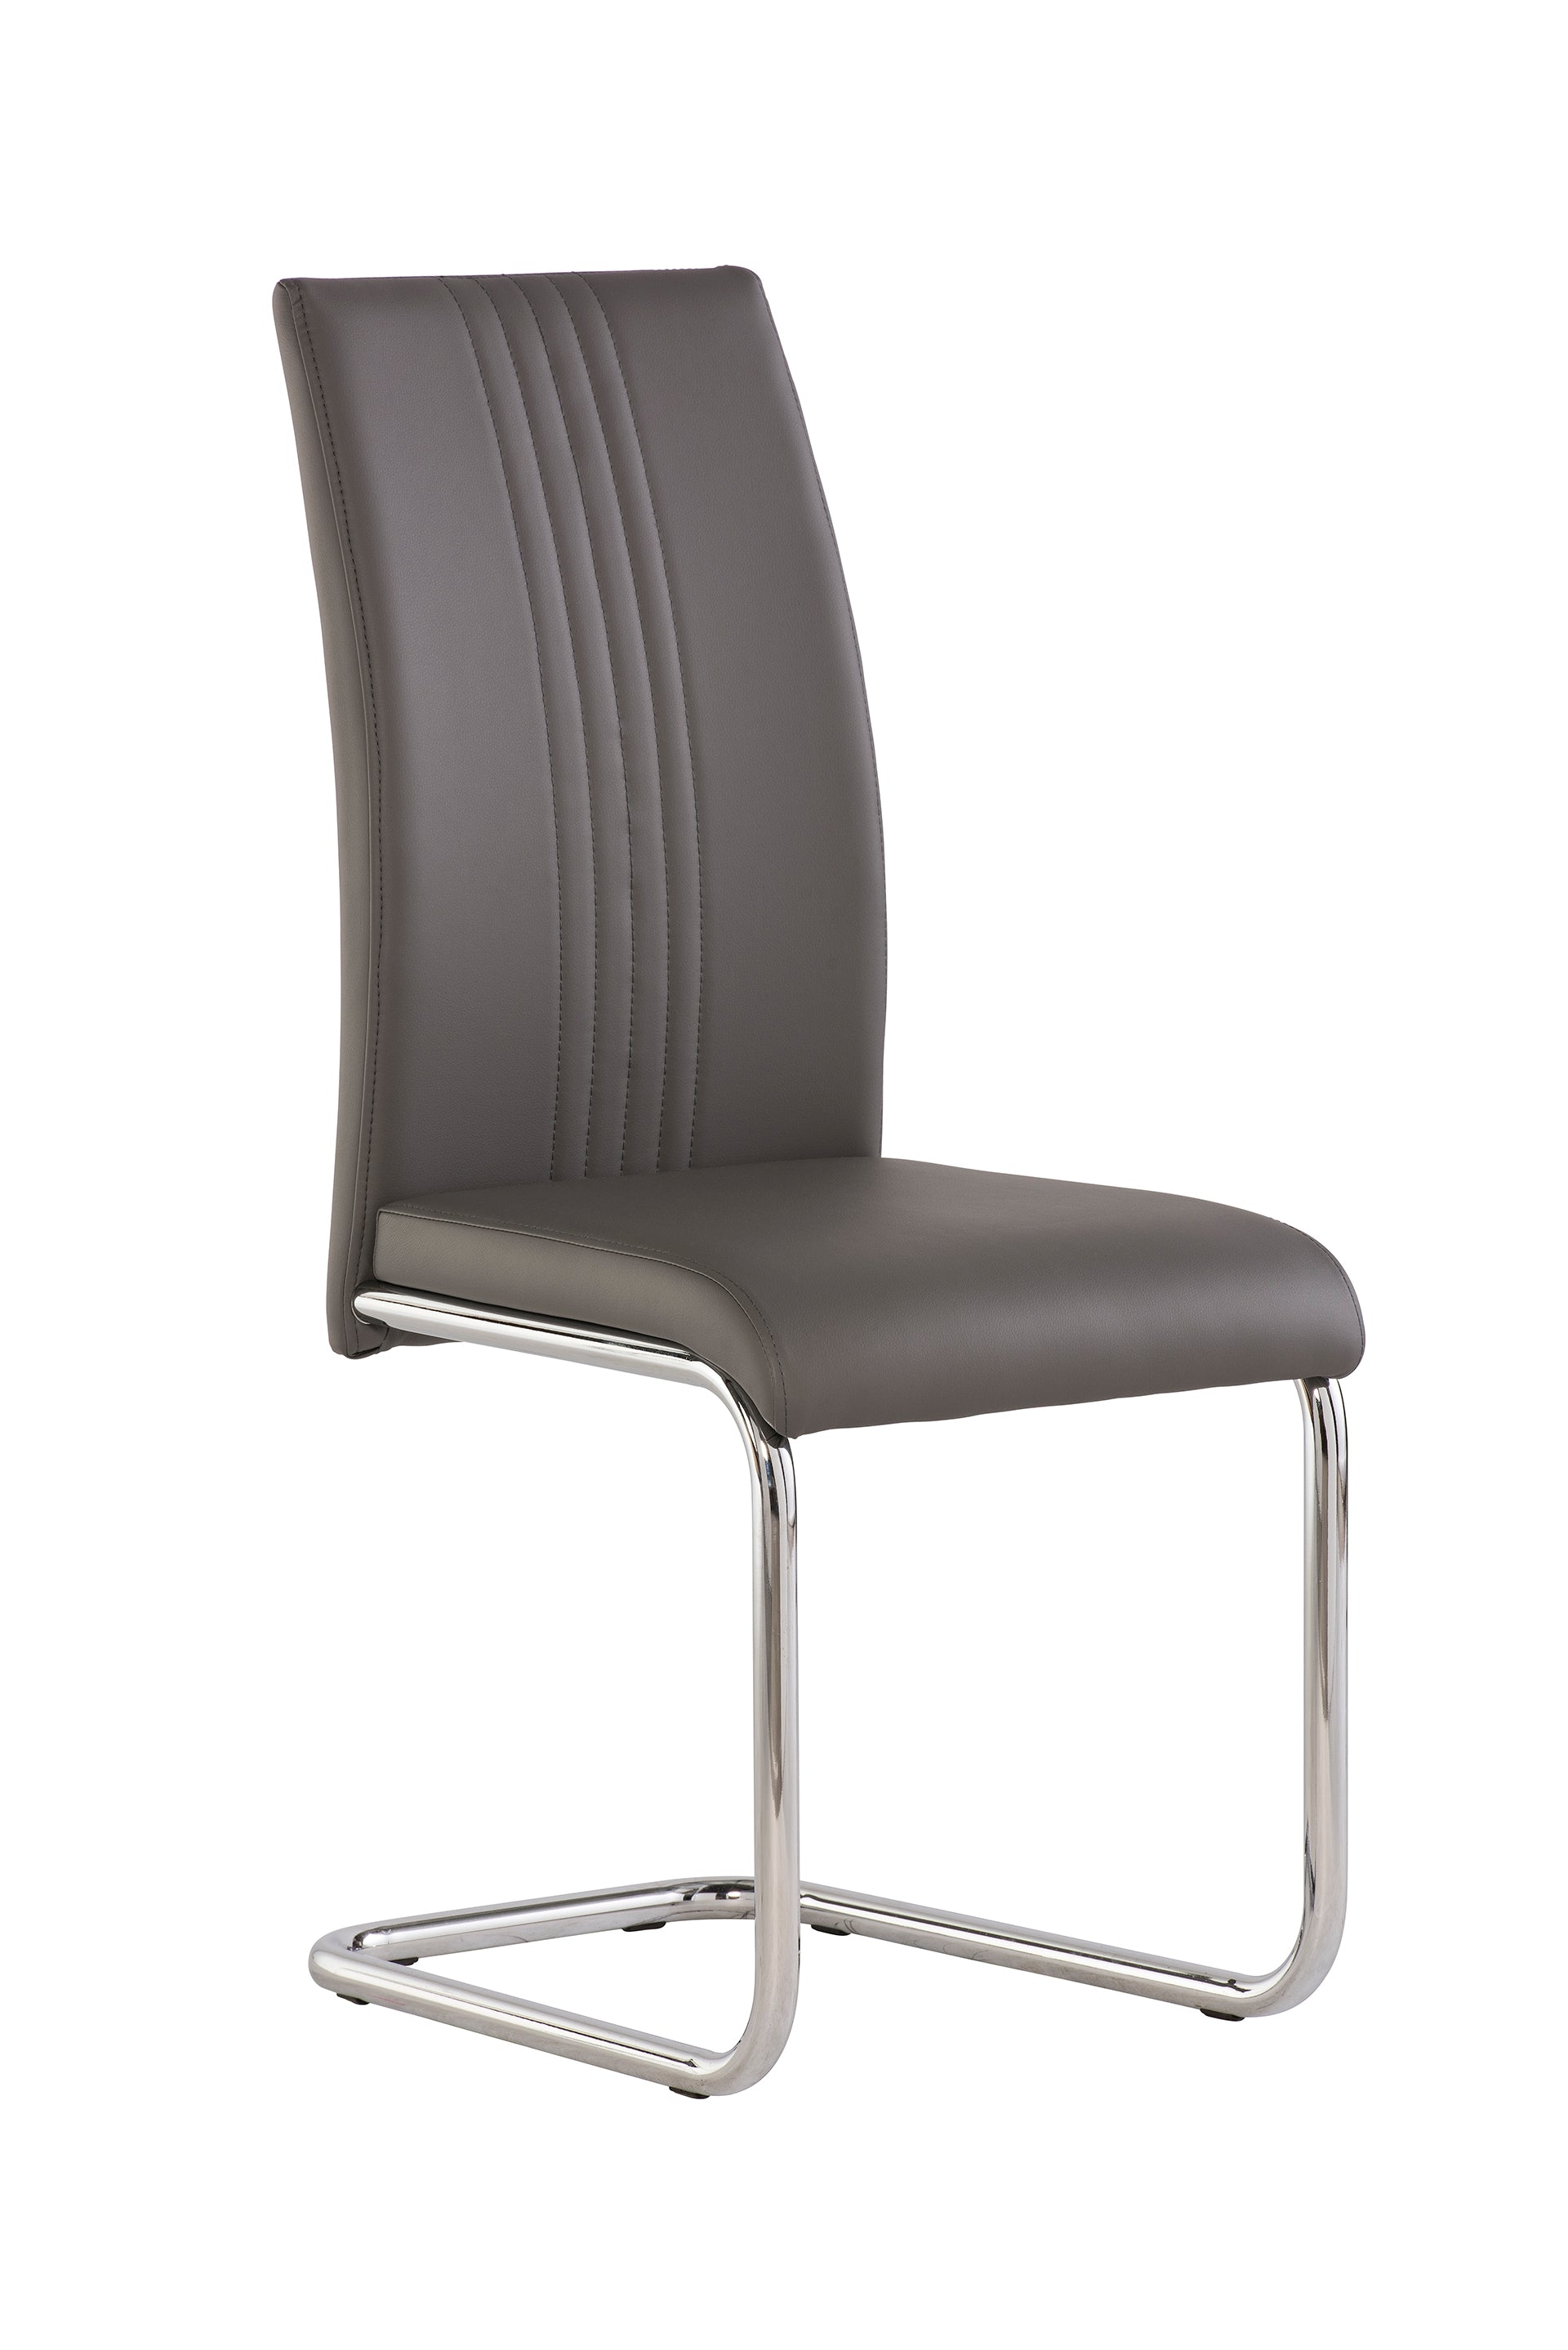 Marshow Pu Cantilever Dining Chair (Pairs), Grey – Lc Living